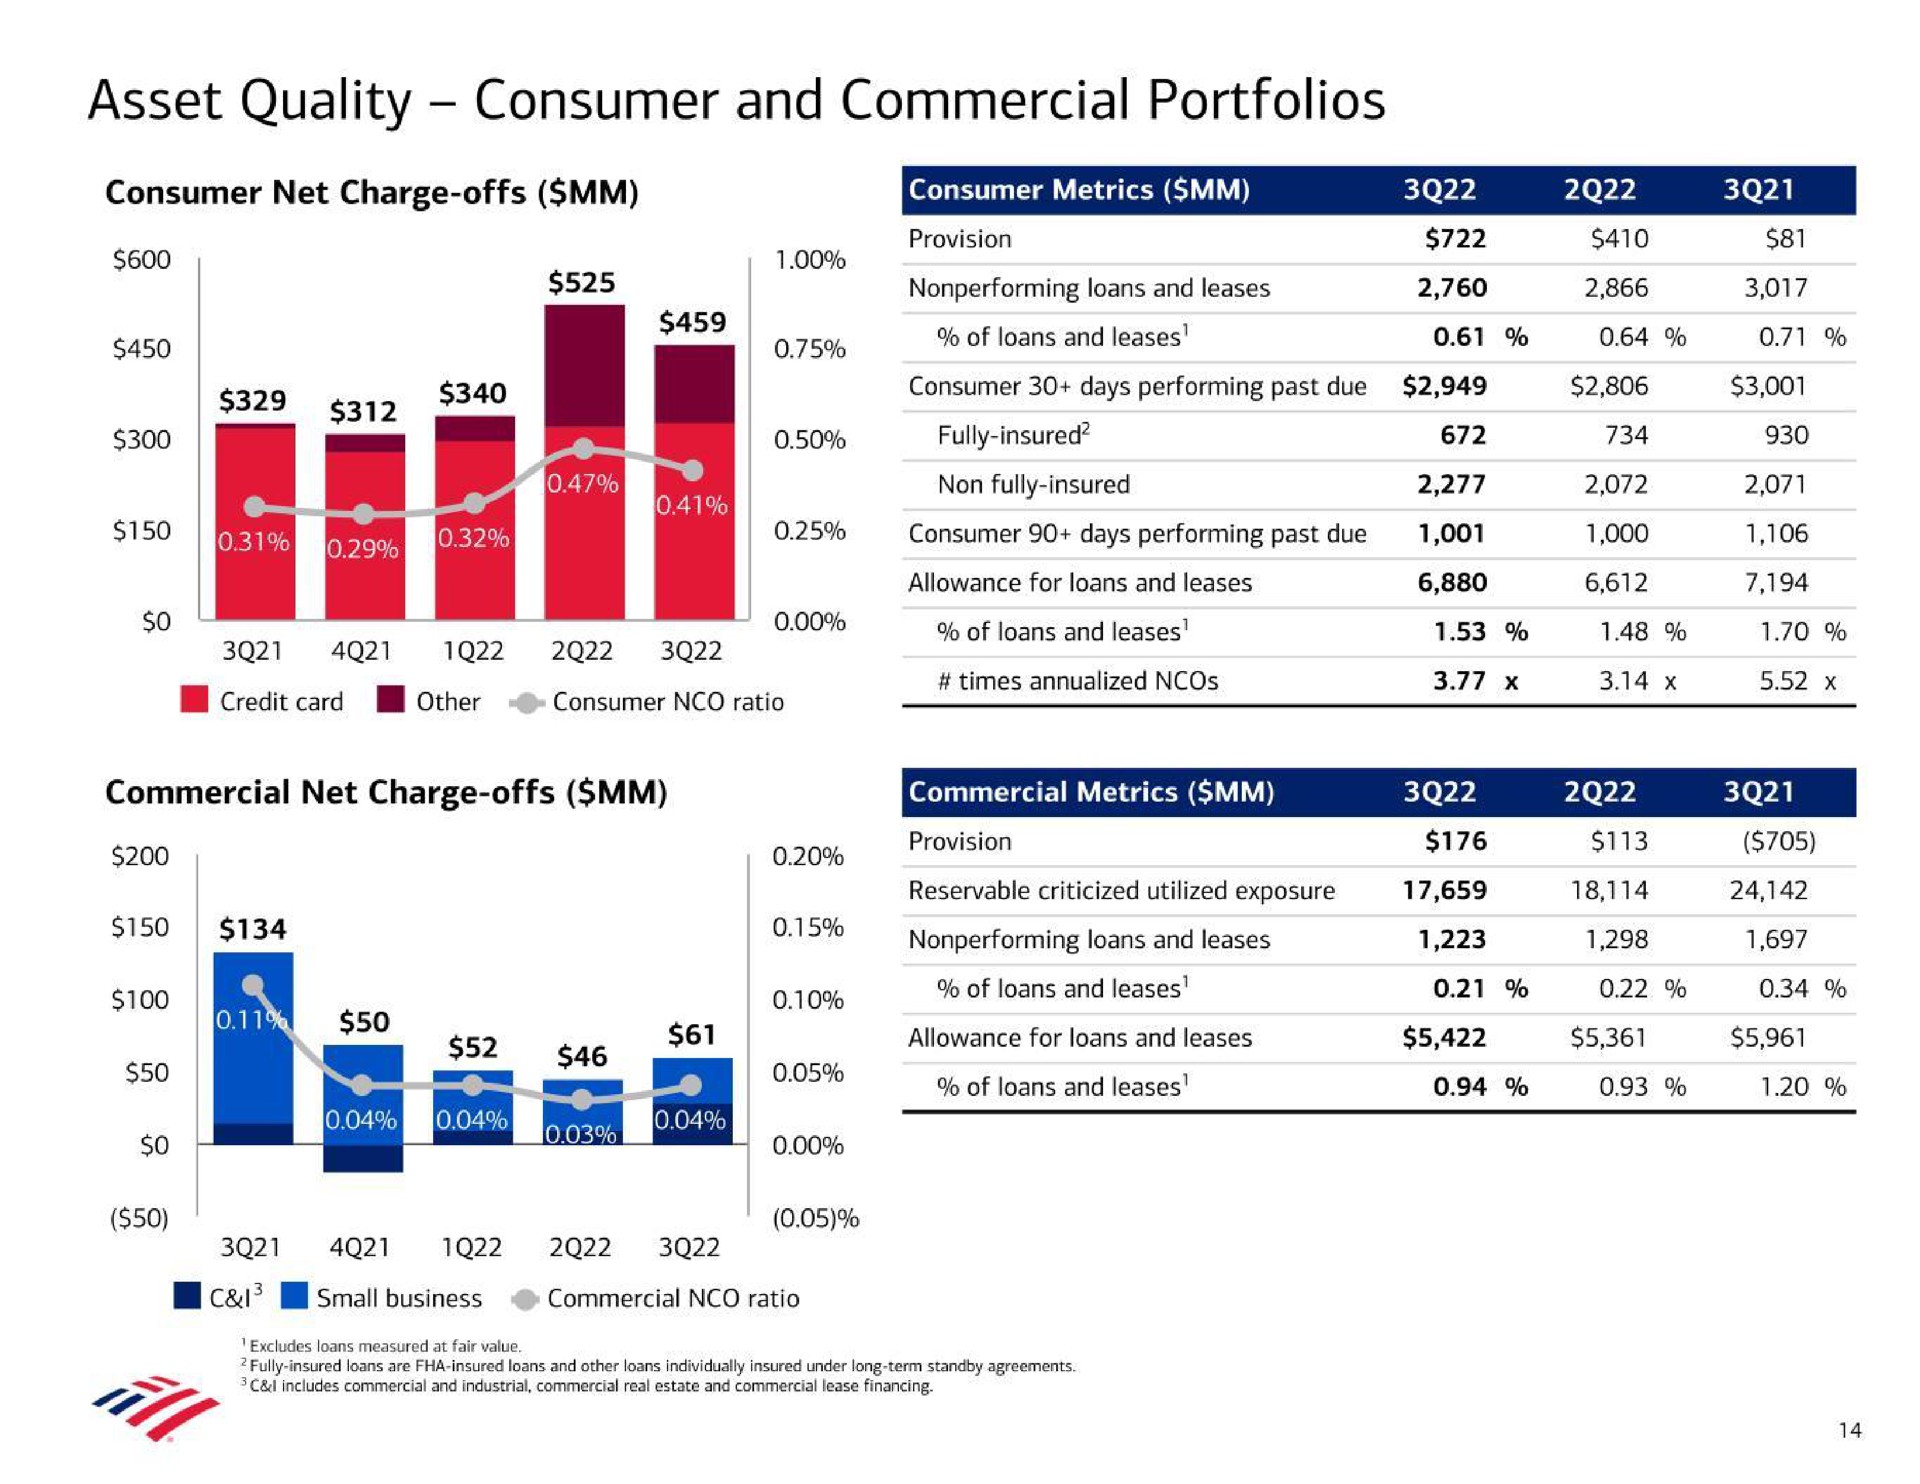 asset quality consumer and commercial portfolios consumer net charge offs commercial net charge offs a | Bank of America